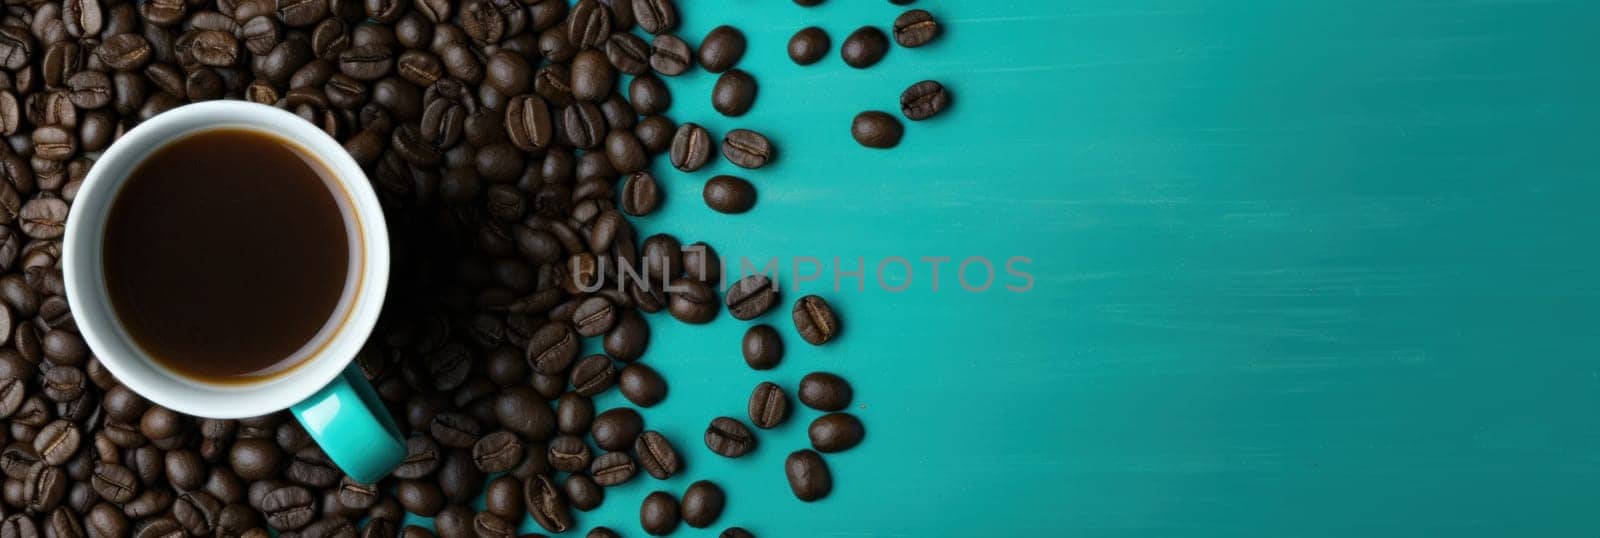 A cup of coffee is surrounded by beans on a turquoise background